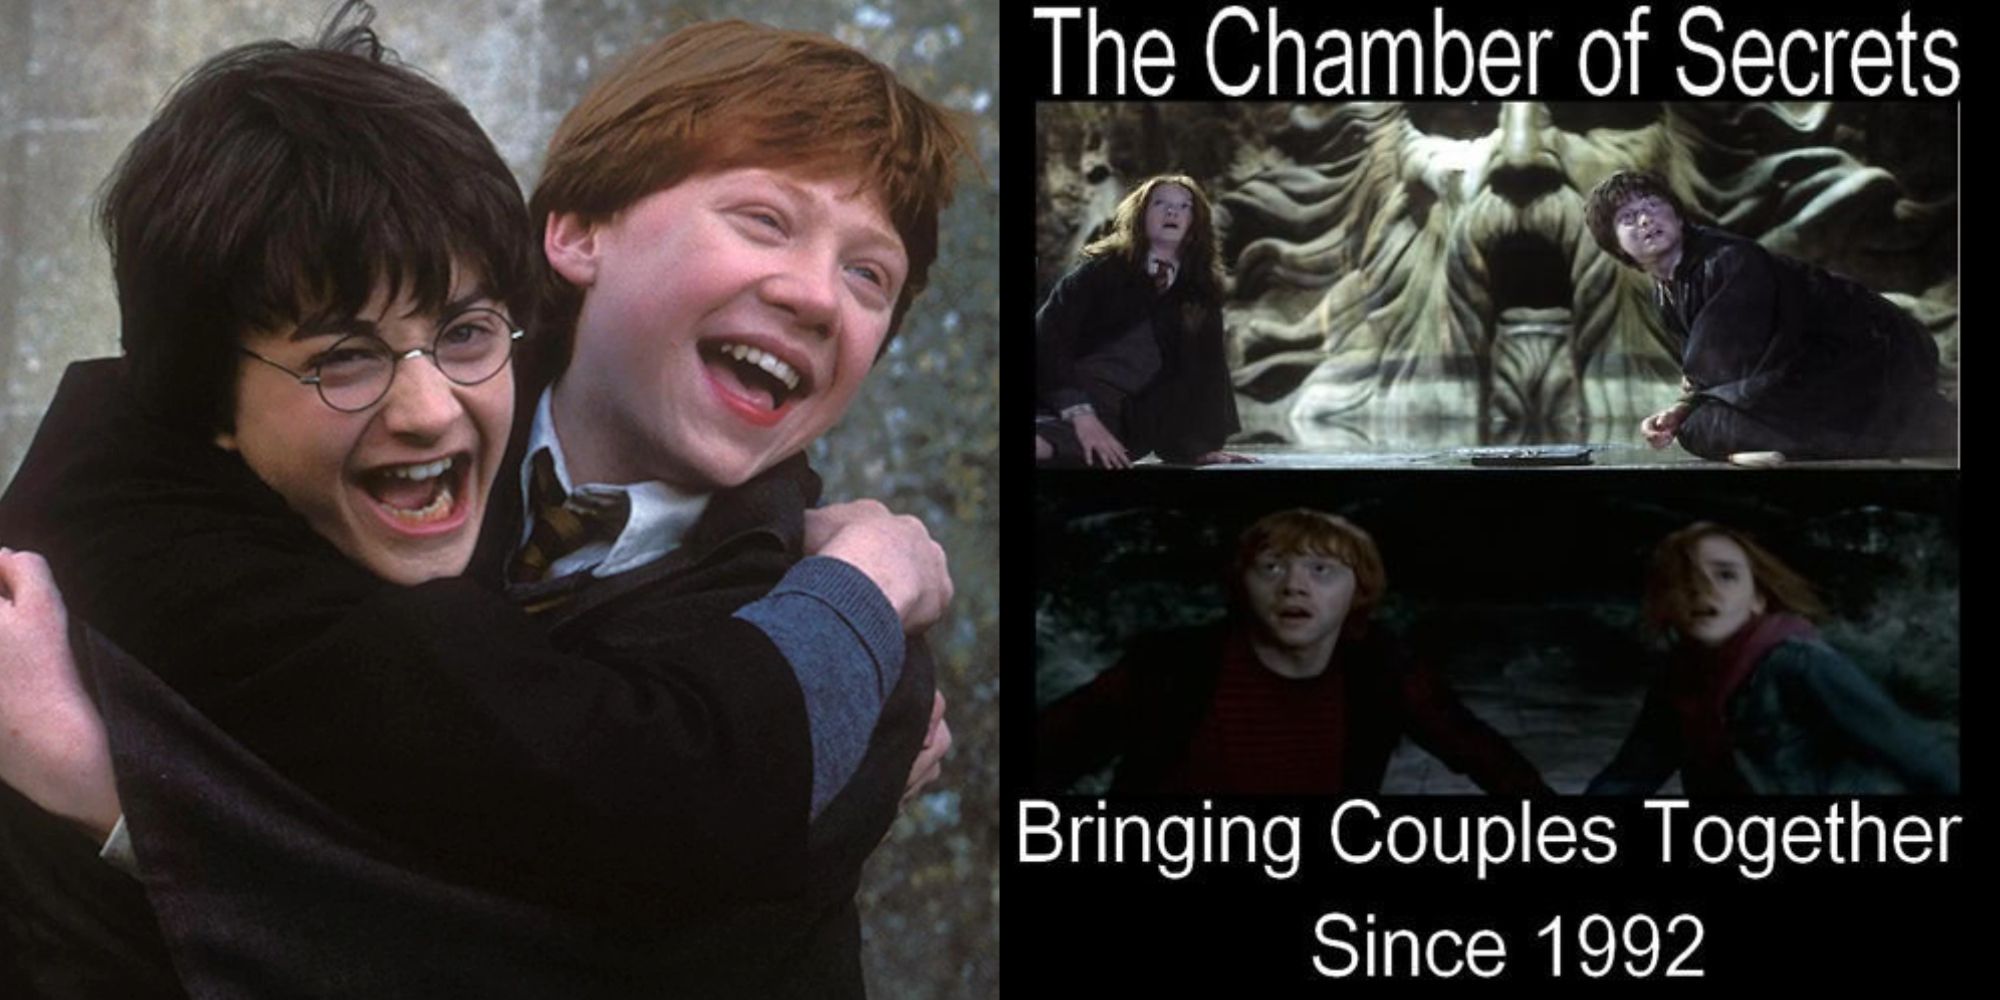 Harry Potter: 10 Memes That Perfectly Sum Up The Golden Trio